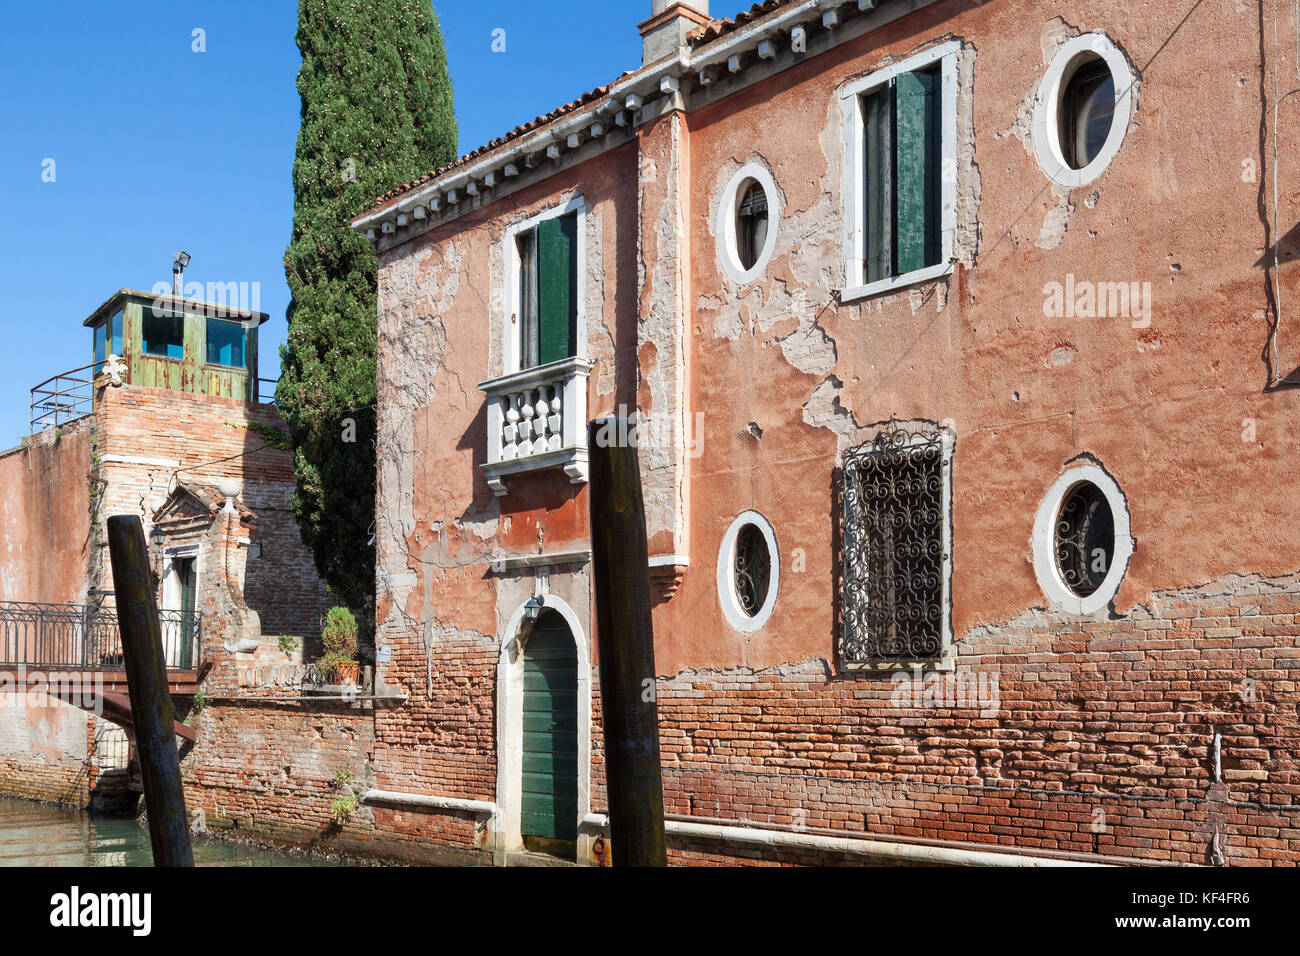 Architectural detail of an ancient house, Giudecca, Venice, Italy  with lovely weathered red brick walls, peeling plaster  and round windows on a cana Stock Photo